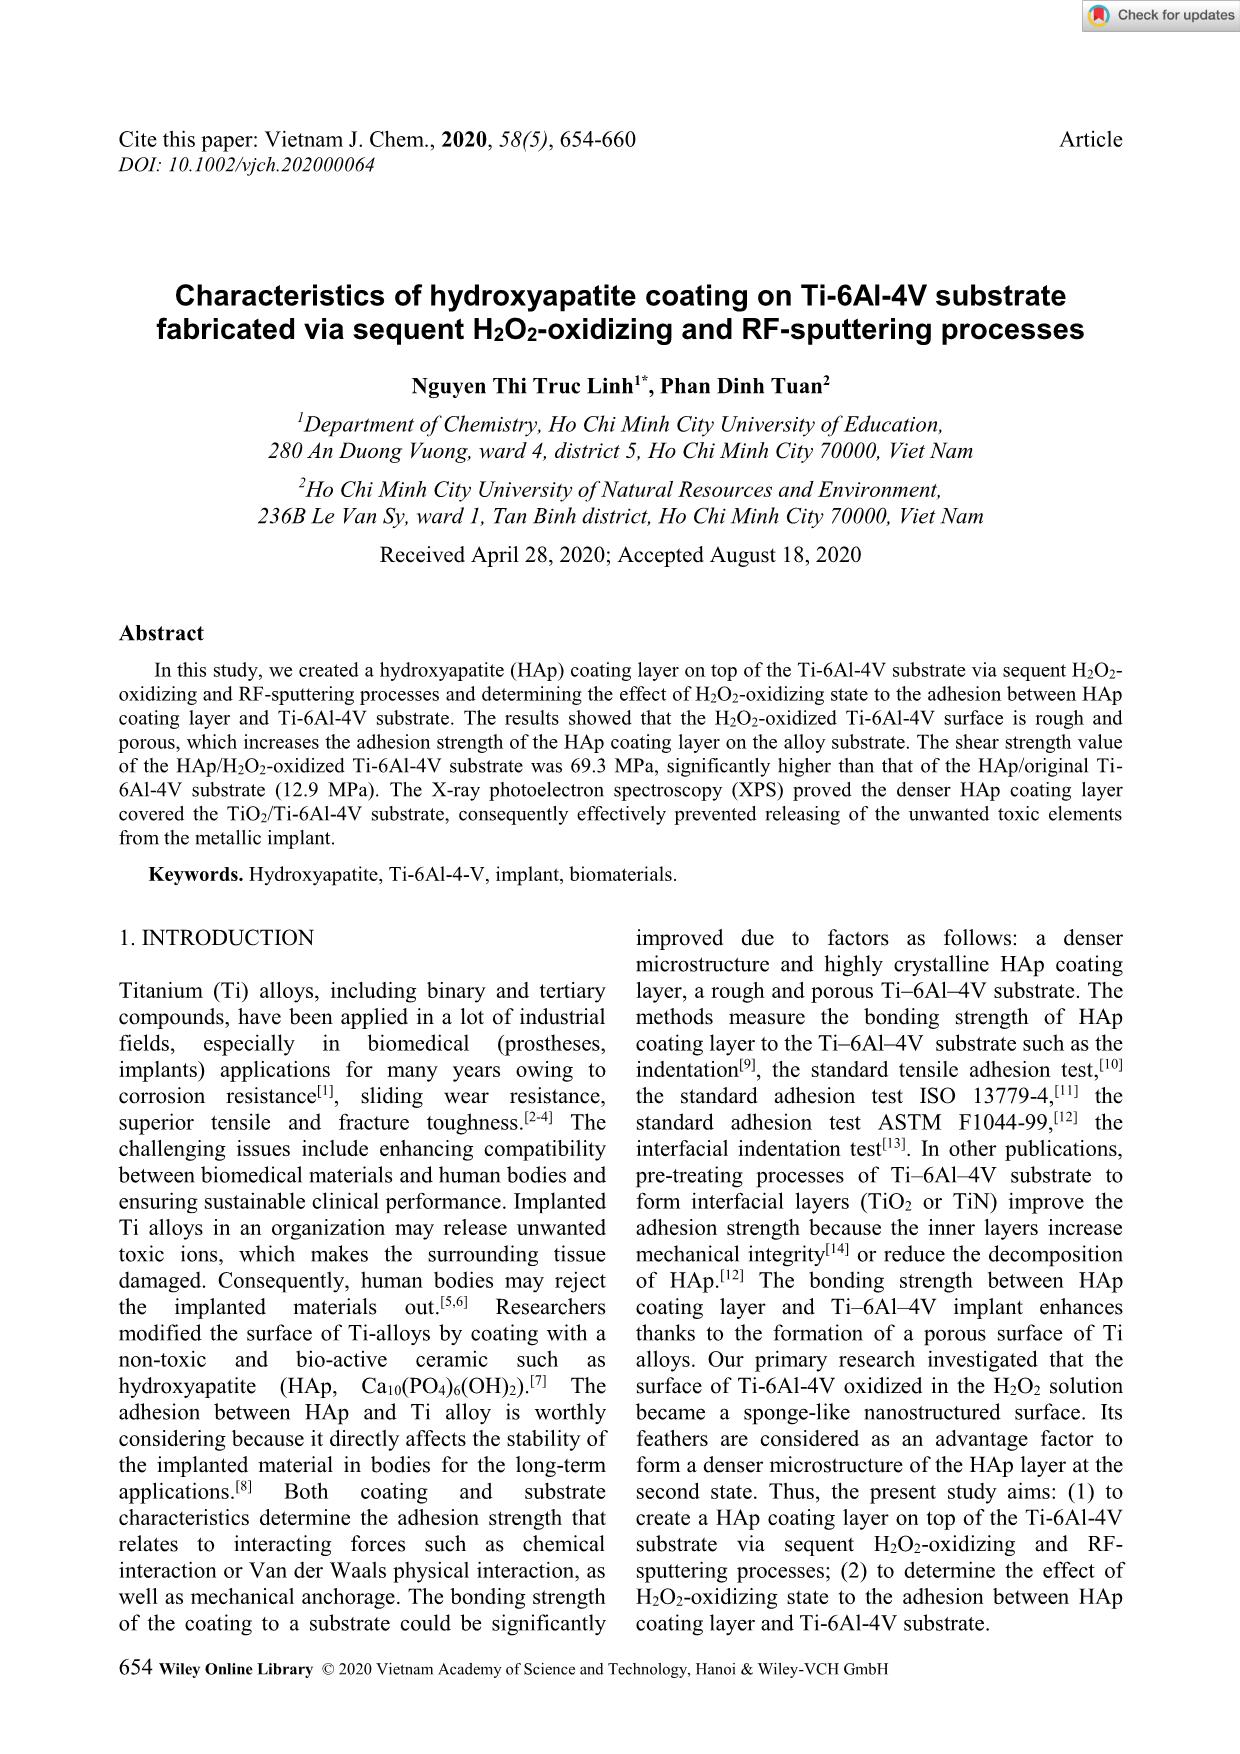 Characteristics of hydroxyapatite coating on Ti-6Al-4V substrate fabricated via sequent H2O2-oxidizing and RF-sputtering processes trang 1